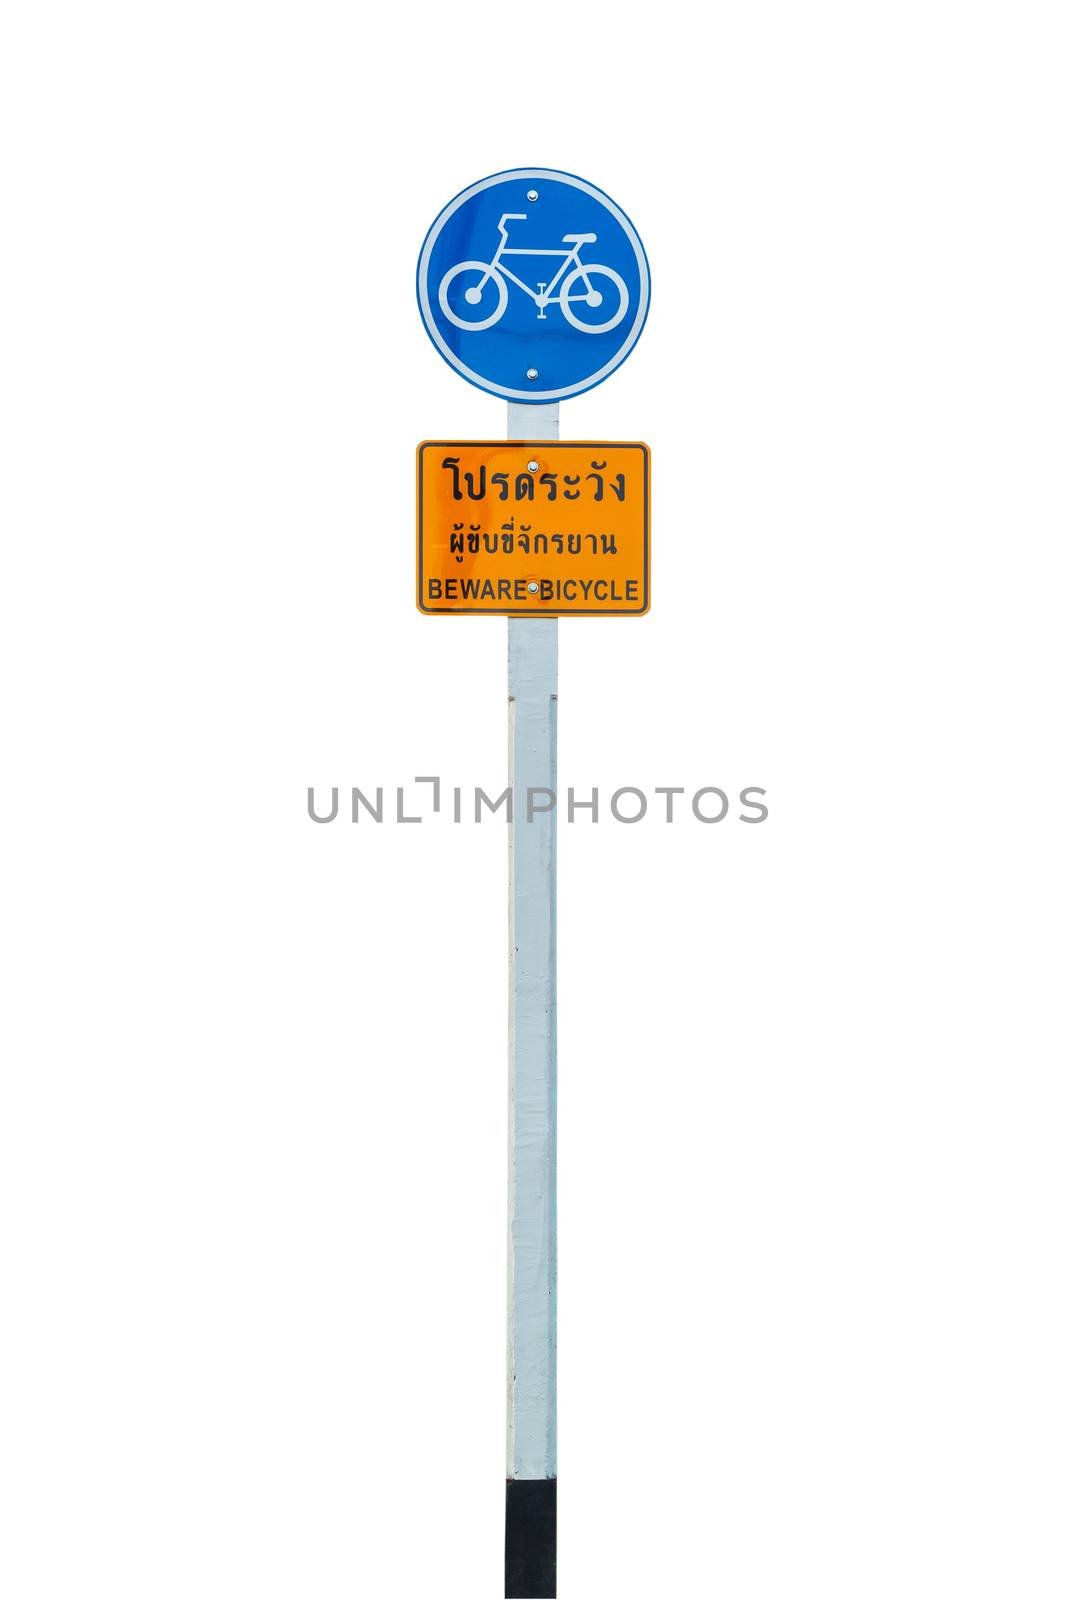 Bicycle sign icon symbol on street pole